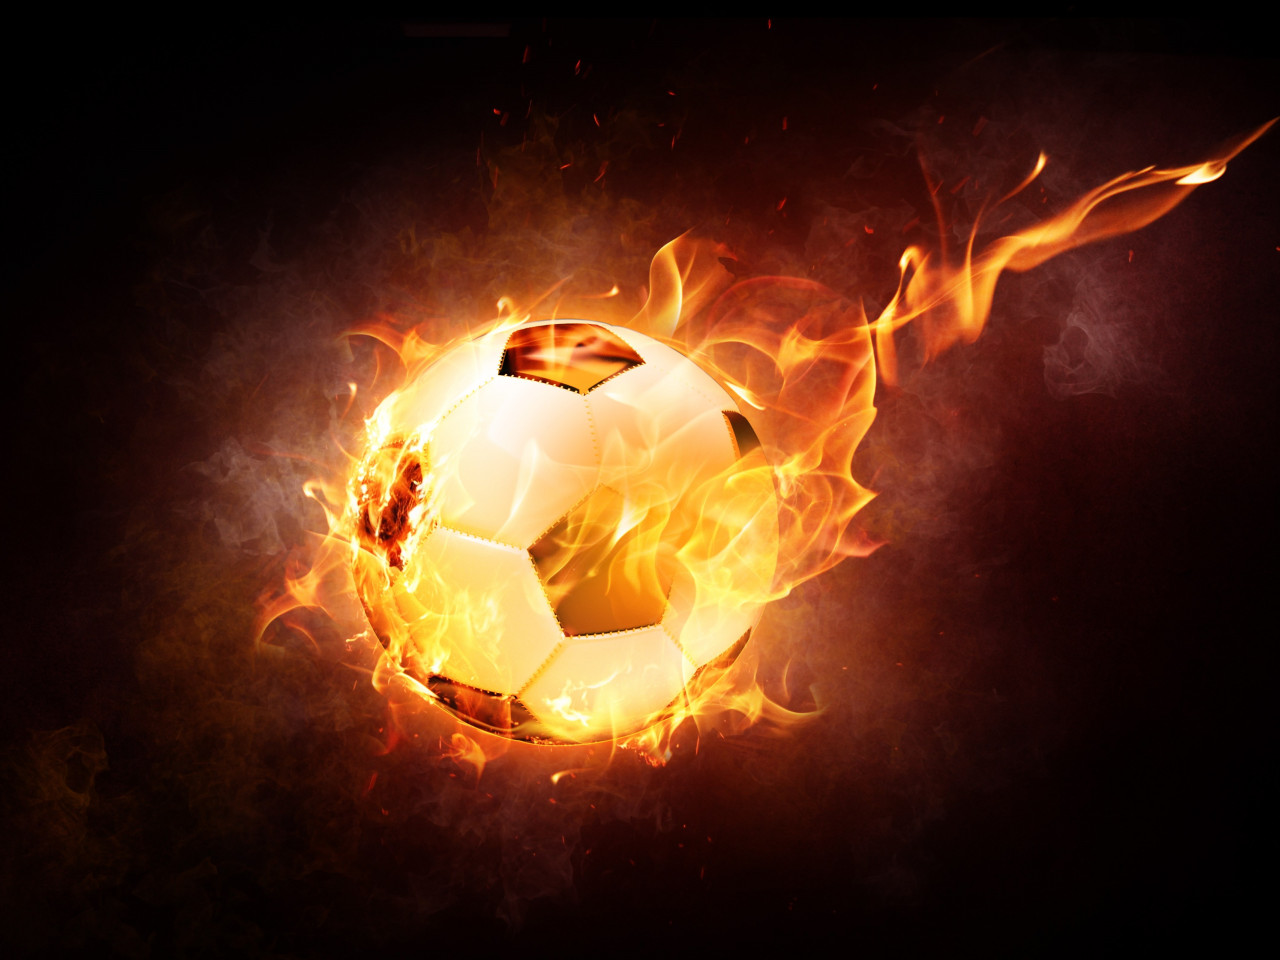 The football ball is on fire wallpaper 1280x960